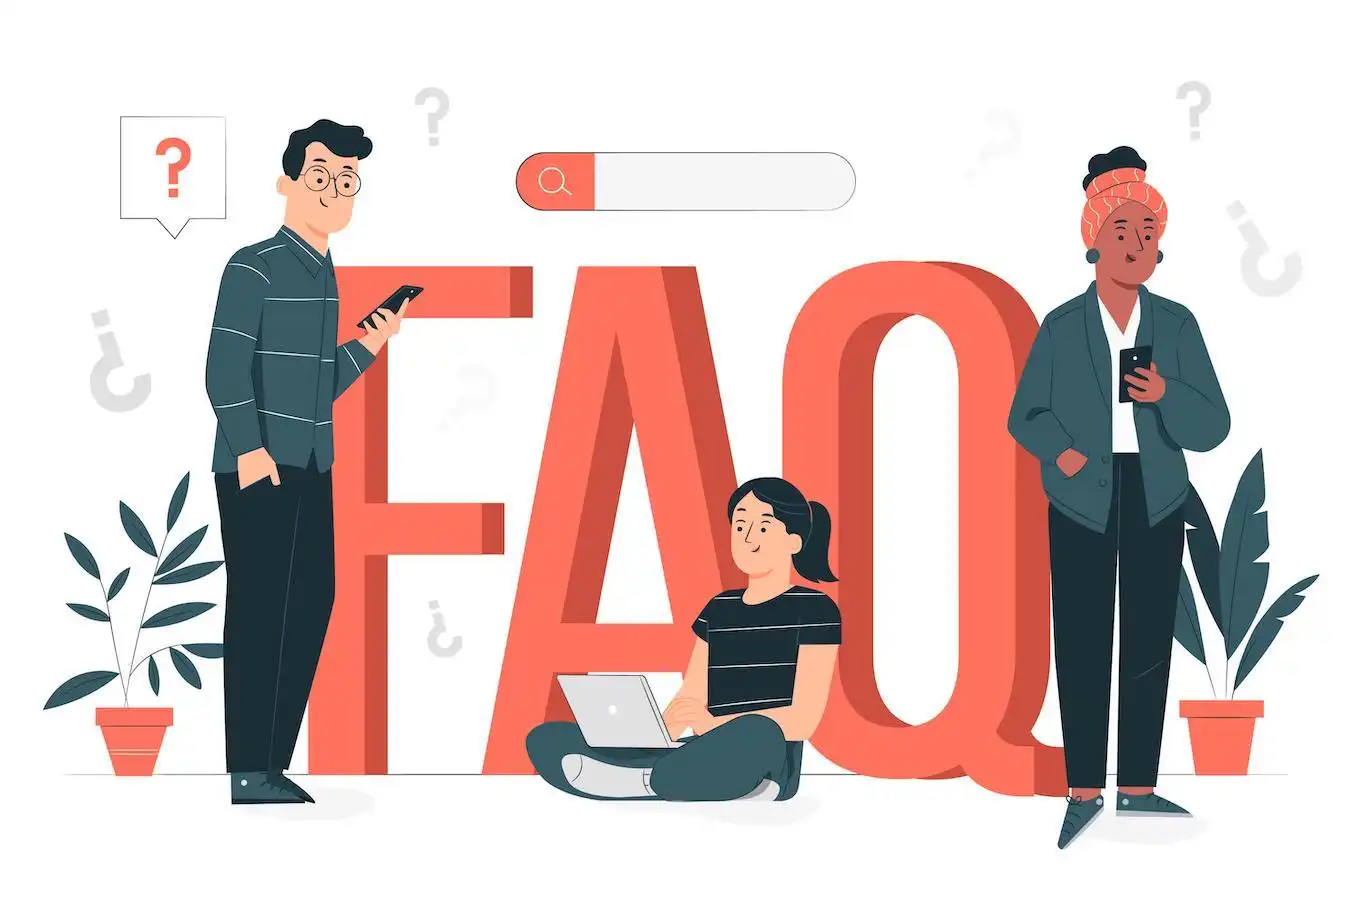 A colorful illustration with three people and the letters "FAQ" representing a Frequently Asked Questions section